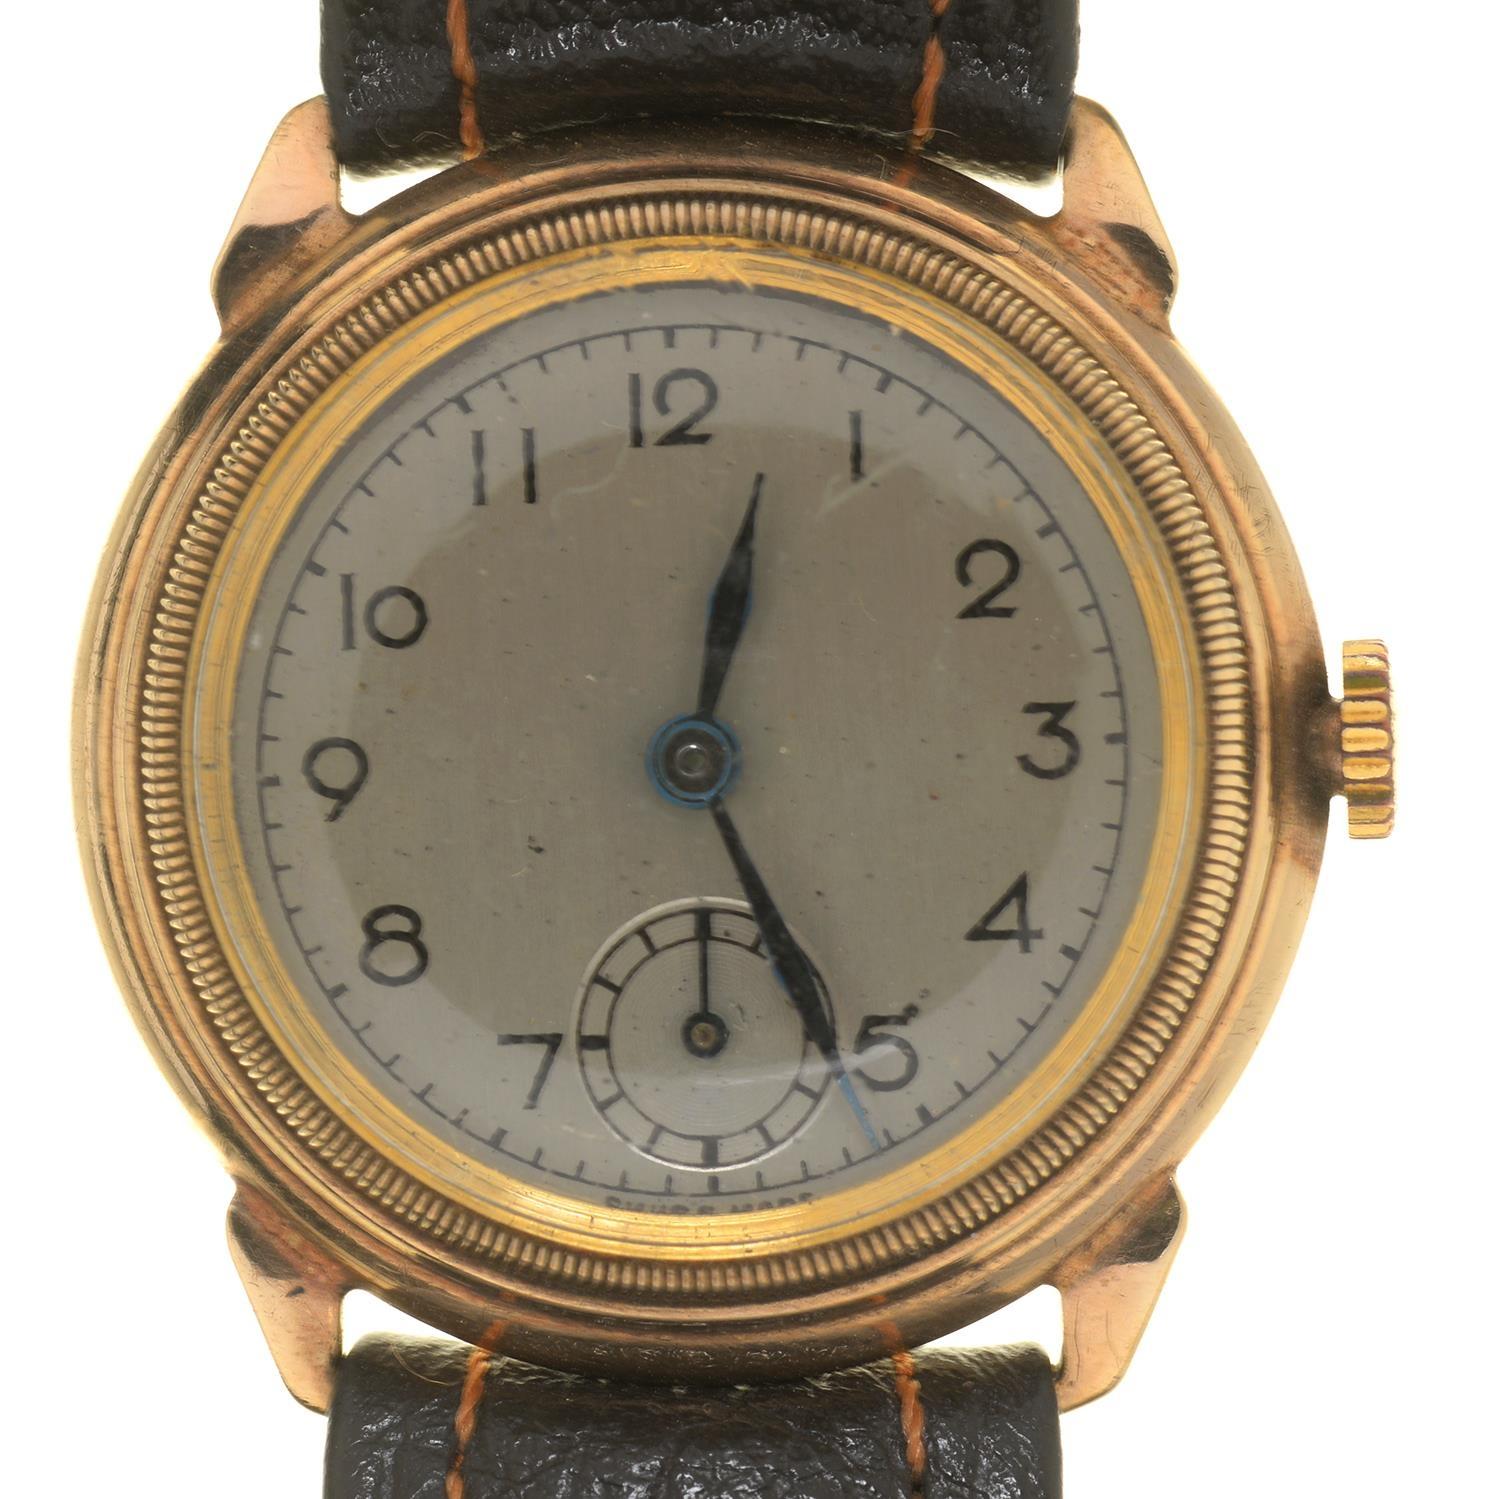 A 9CT GOLD WRISTWATCH WITH MILLED BEZEL AND 'BUBBLE' BACK, 29MM DIA, CHESTER 1943 Working order,